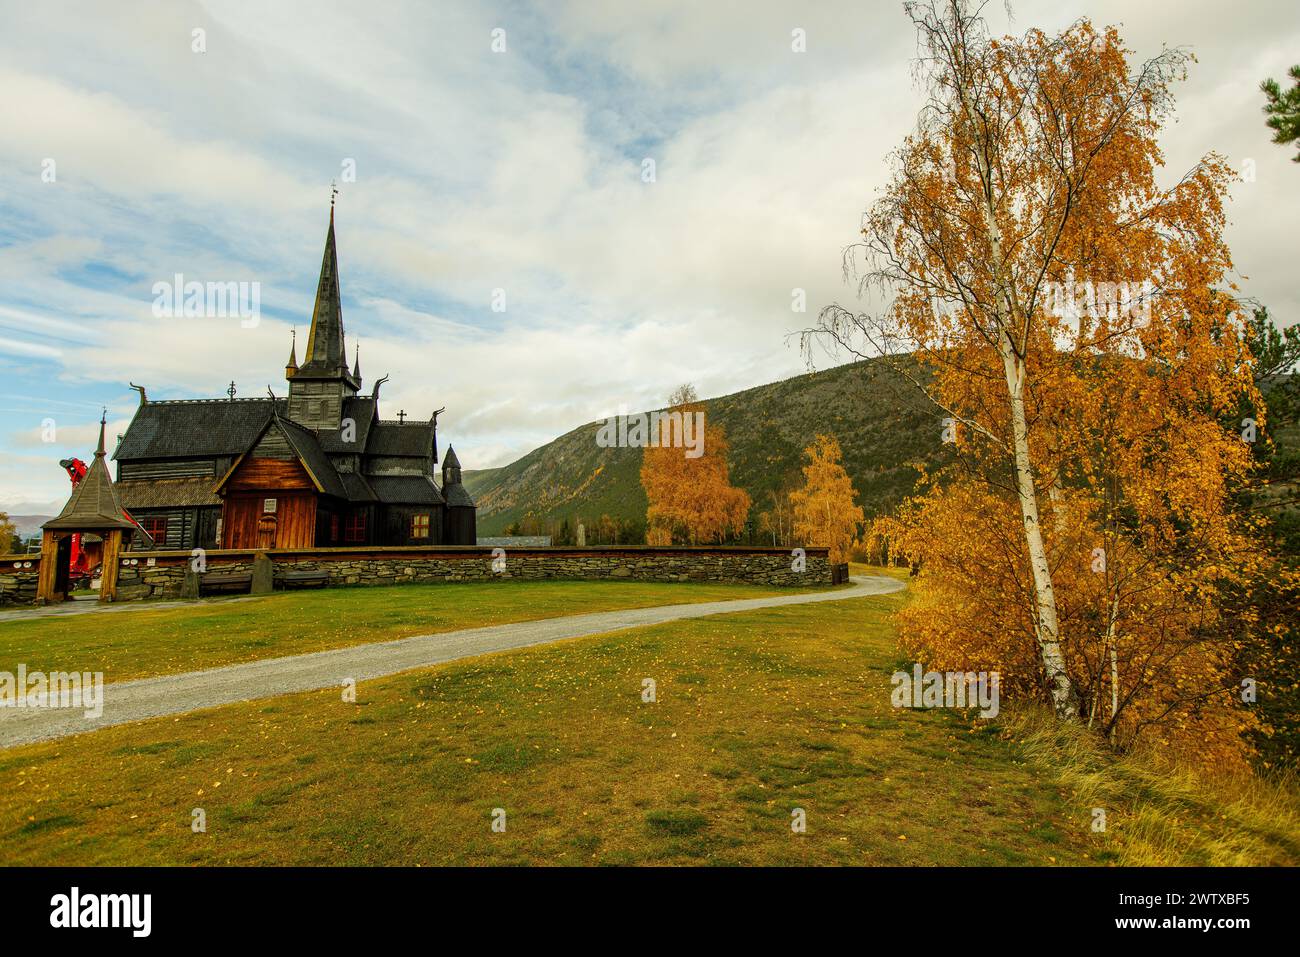 Timeless beauty standing tall amidst Norway's serene landscapes. ?⛰️ #NorwegianHistory #OldChurchCharm Stock Photo